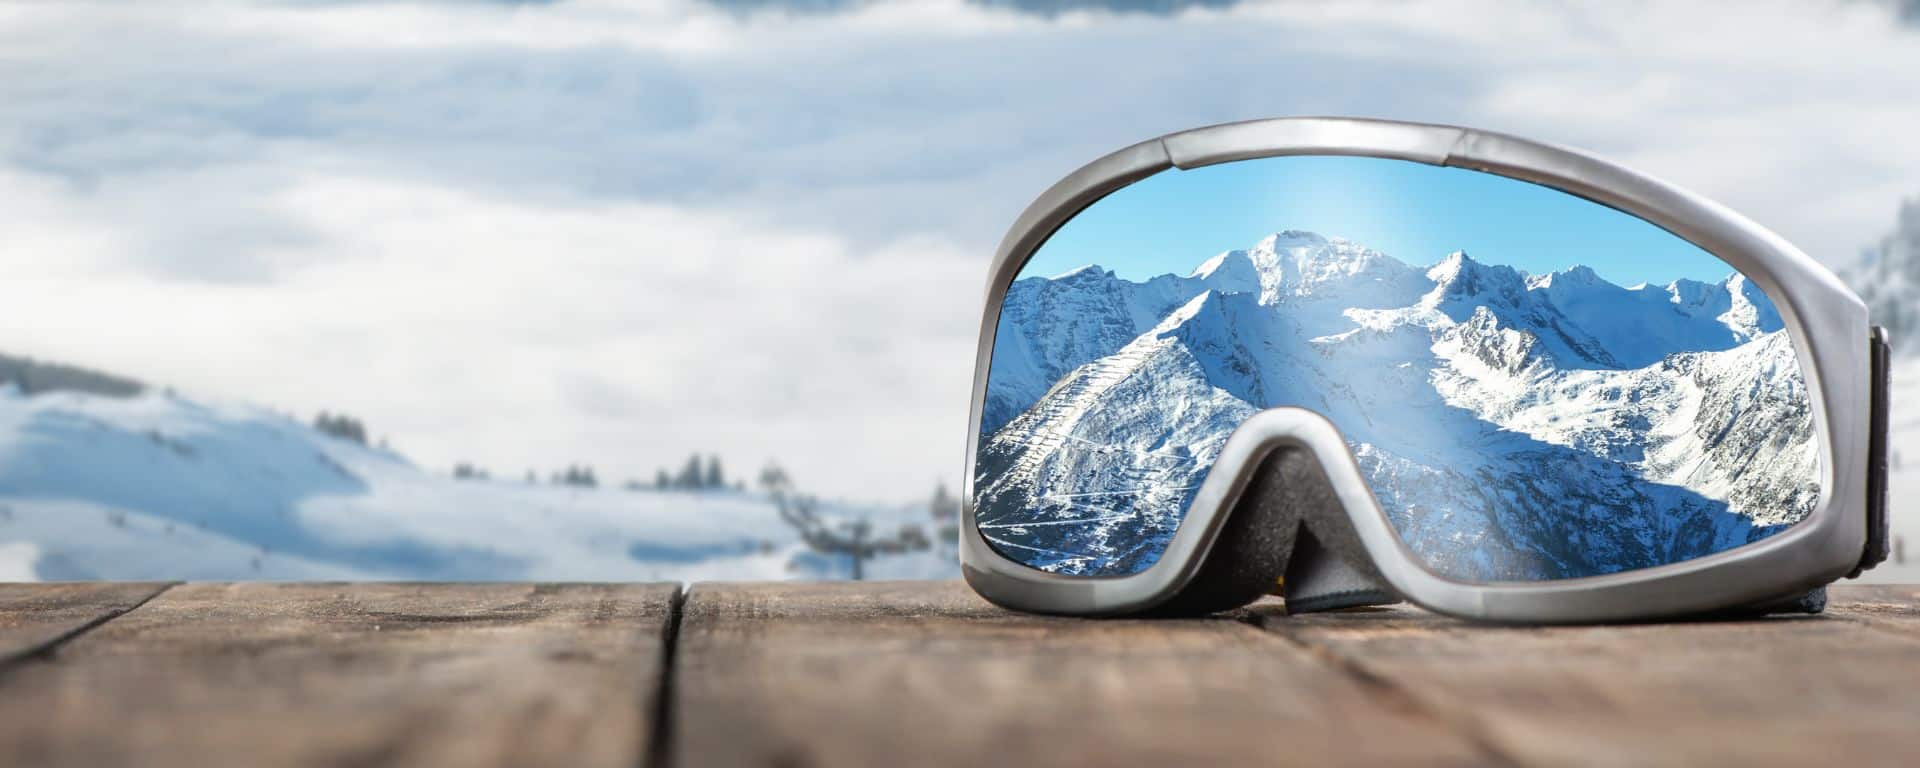 How To Choose Ski Goggles - Feature Image